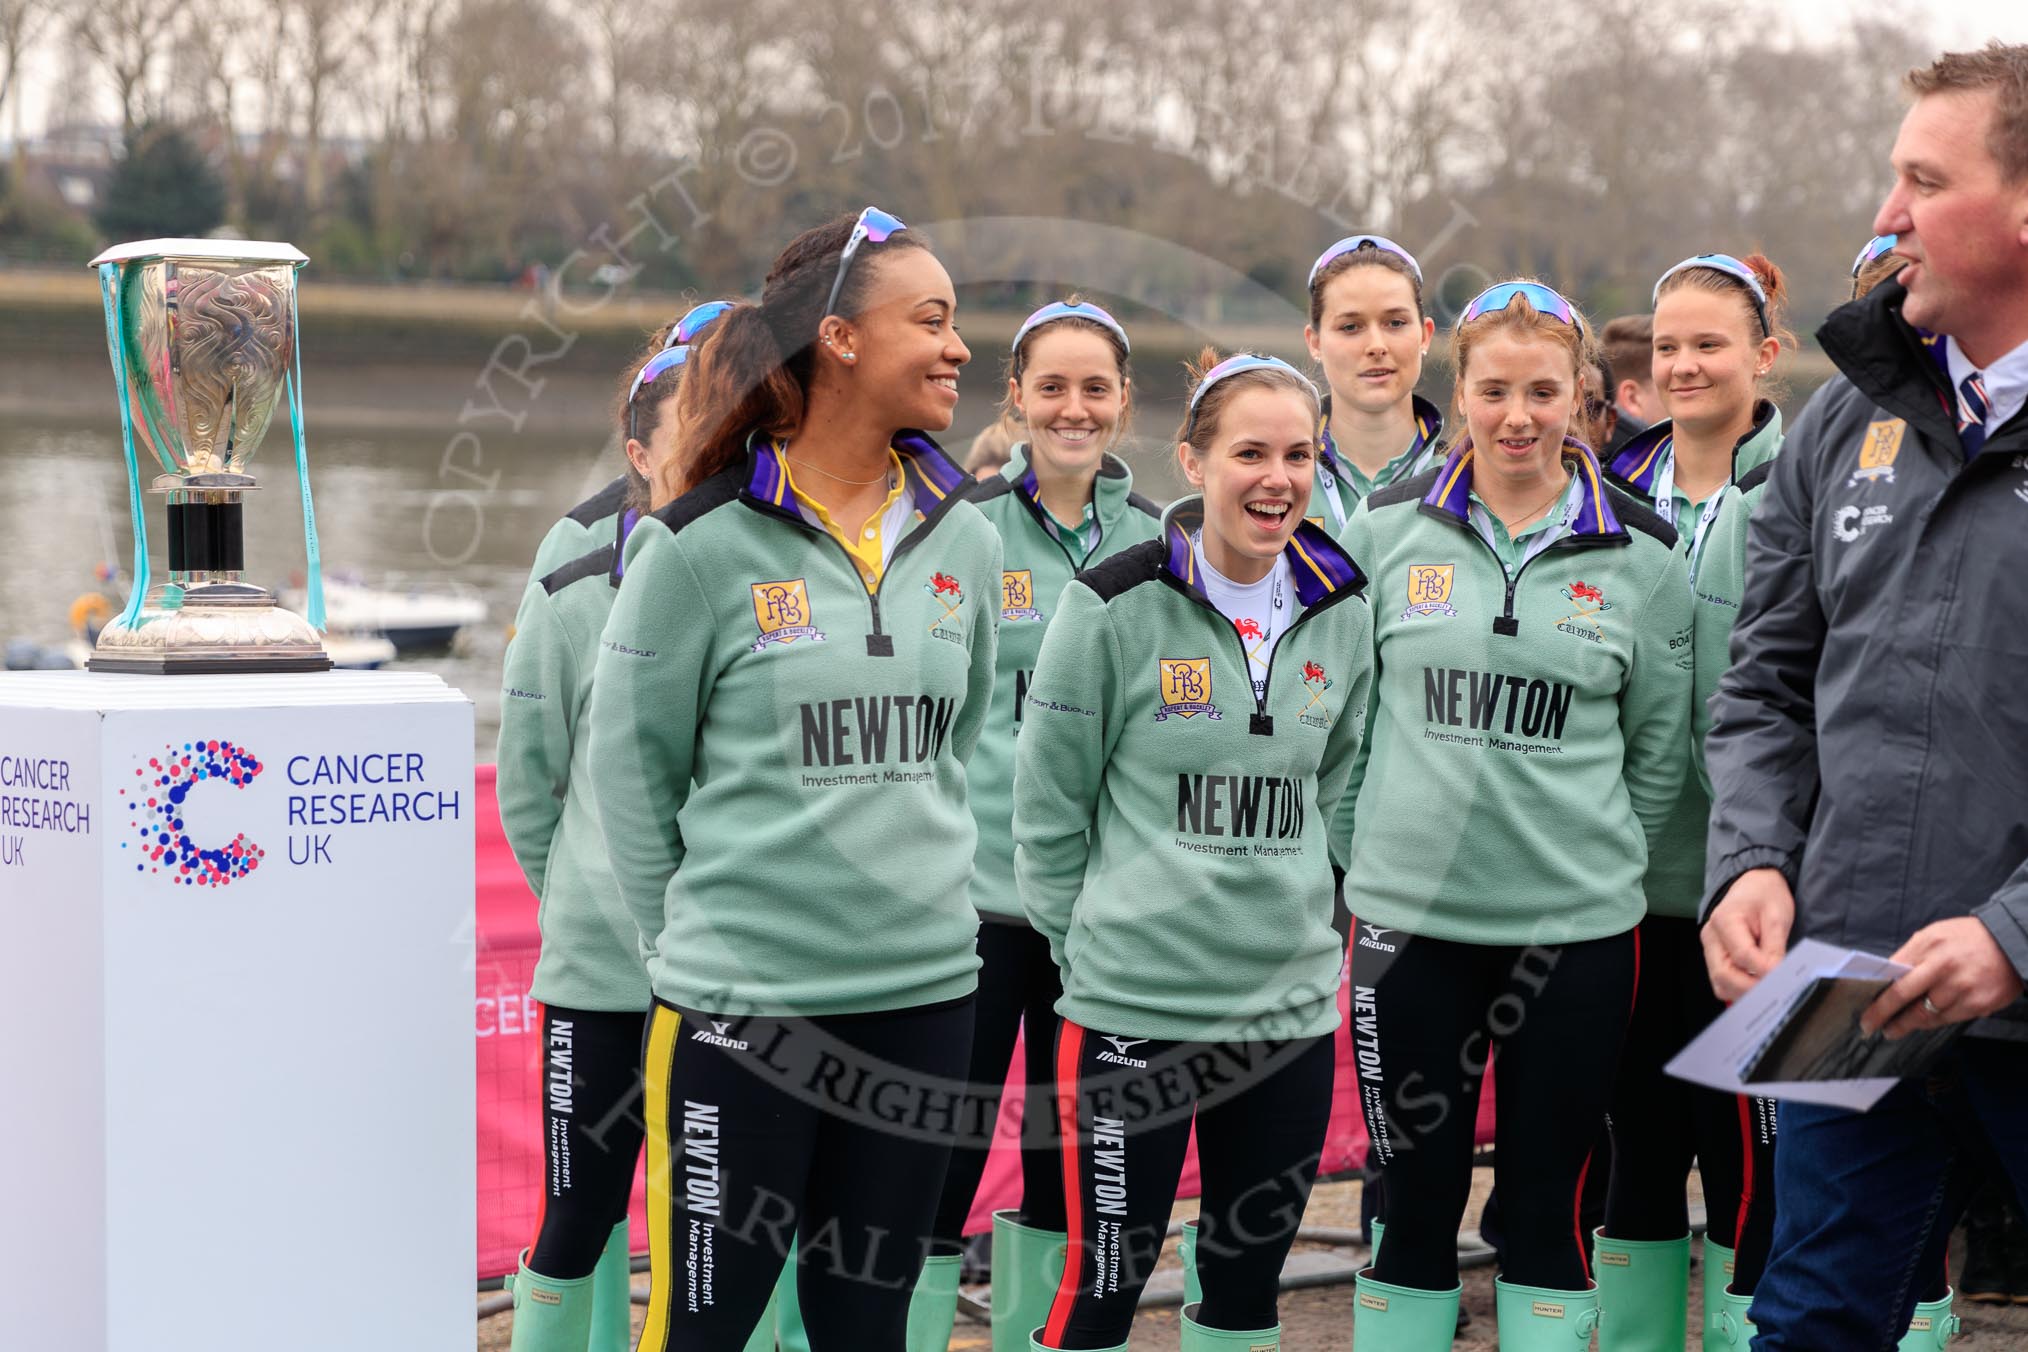 The Cancer Research UK Women's Boat Race 2018: The Cambridge crew with the Women's Boat Race trophy at the toss - president Daphne Martschenko (rowing in the reserve boat), cox Sophie Shapter, 6 Alice White, 7 Myriam Goudet-Boukhatmi, and in the second row 2 seat Imogen Grant, 3 Kelsey Barolak, 4 Thea Zabell, and 5 Paula Wesselmann. On the right race umpire Sir Matthew Pinsent..
River Thames between Putney Bridge and Mortlake,
London SW15,

United Kingdom,
on 24 March 2018 at 14:41, image #47